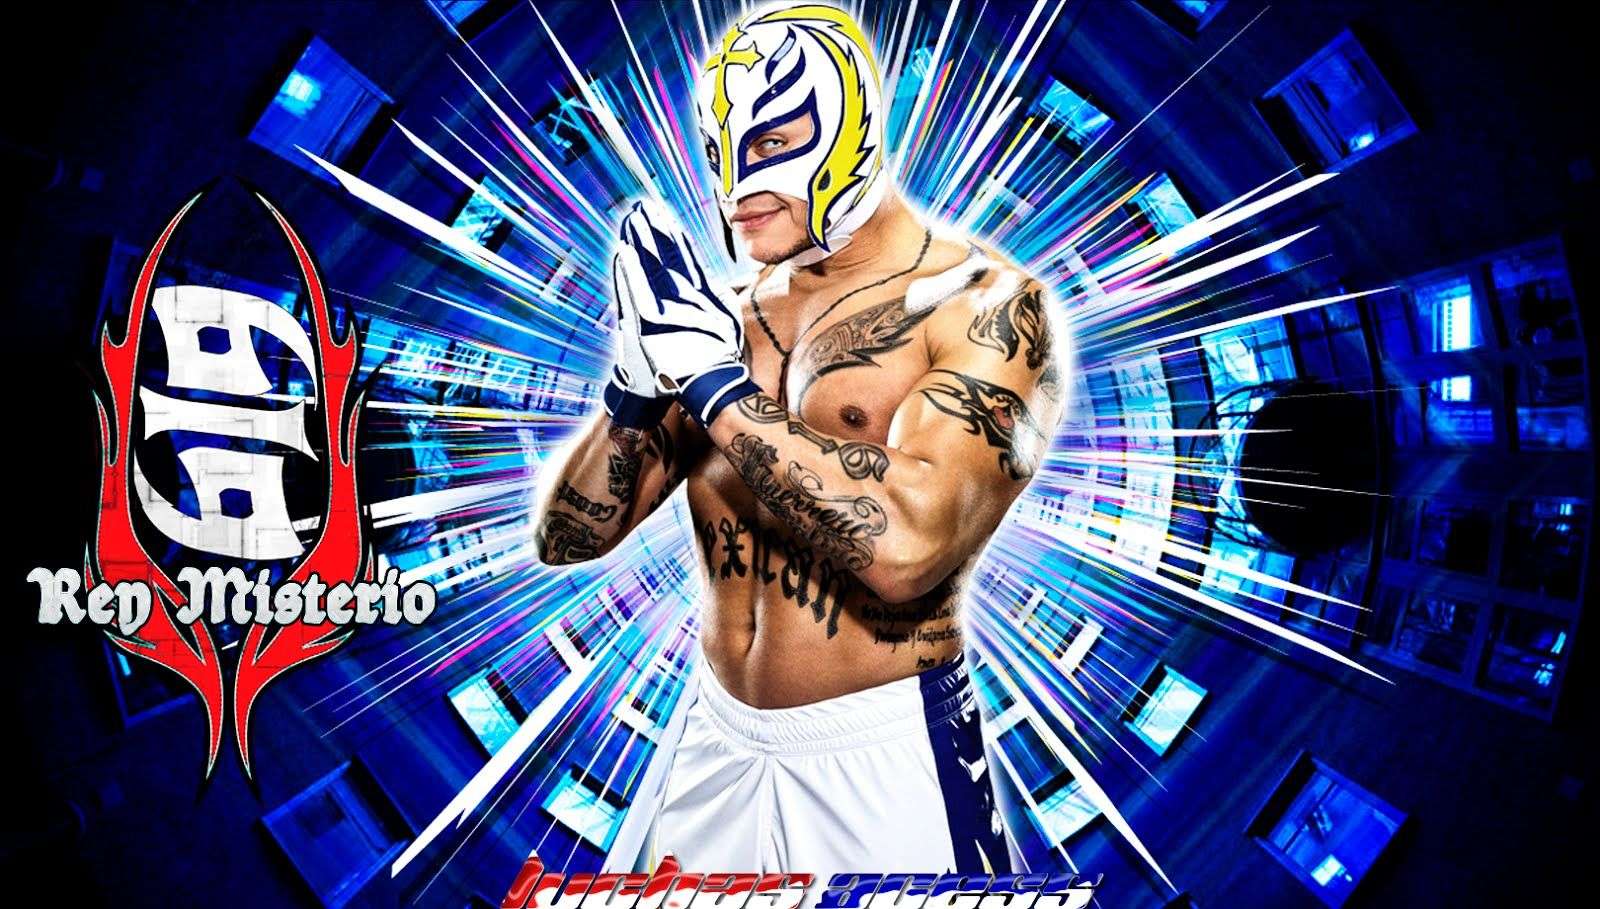 Rey Mysterio Wallpapers HD - Wallpaper Cave